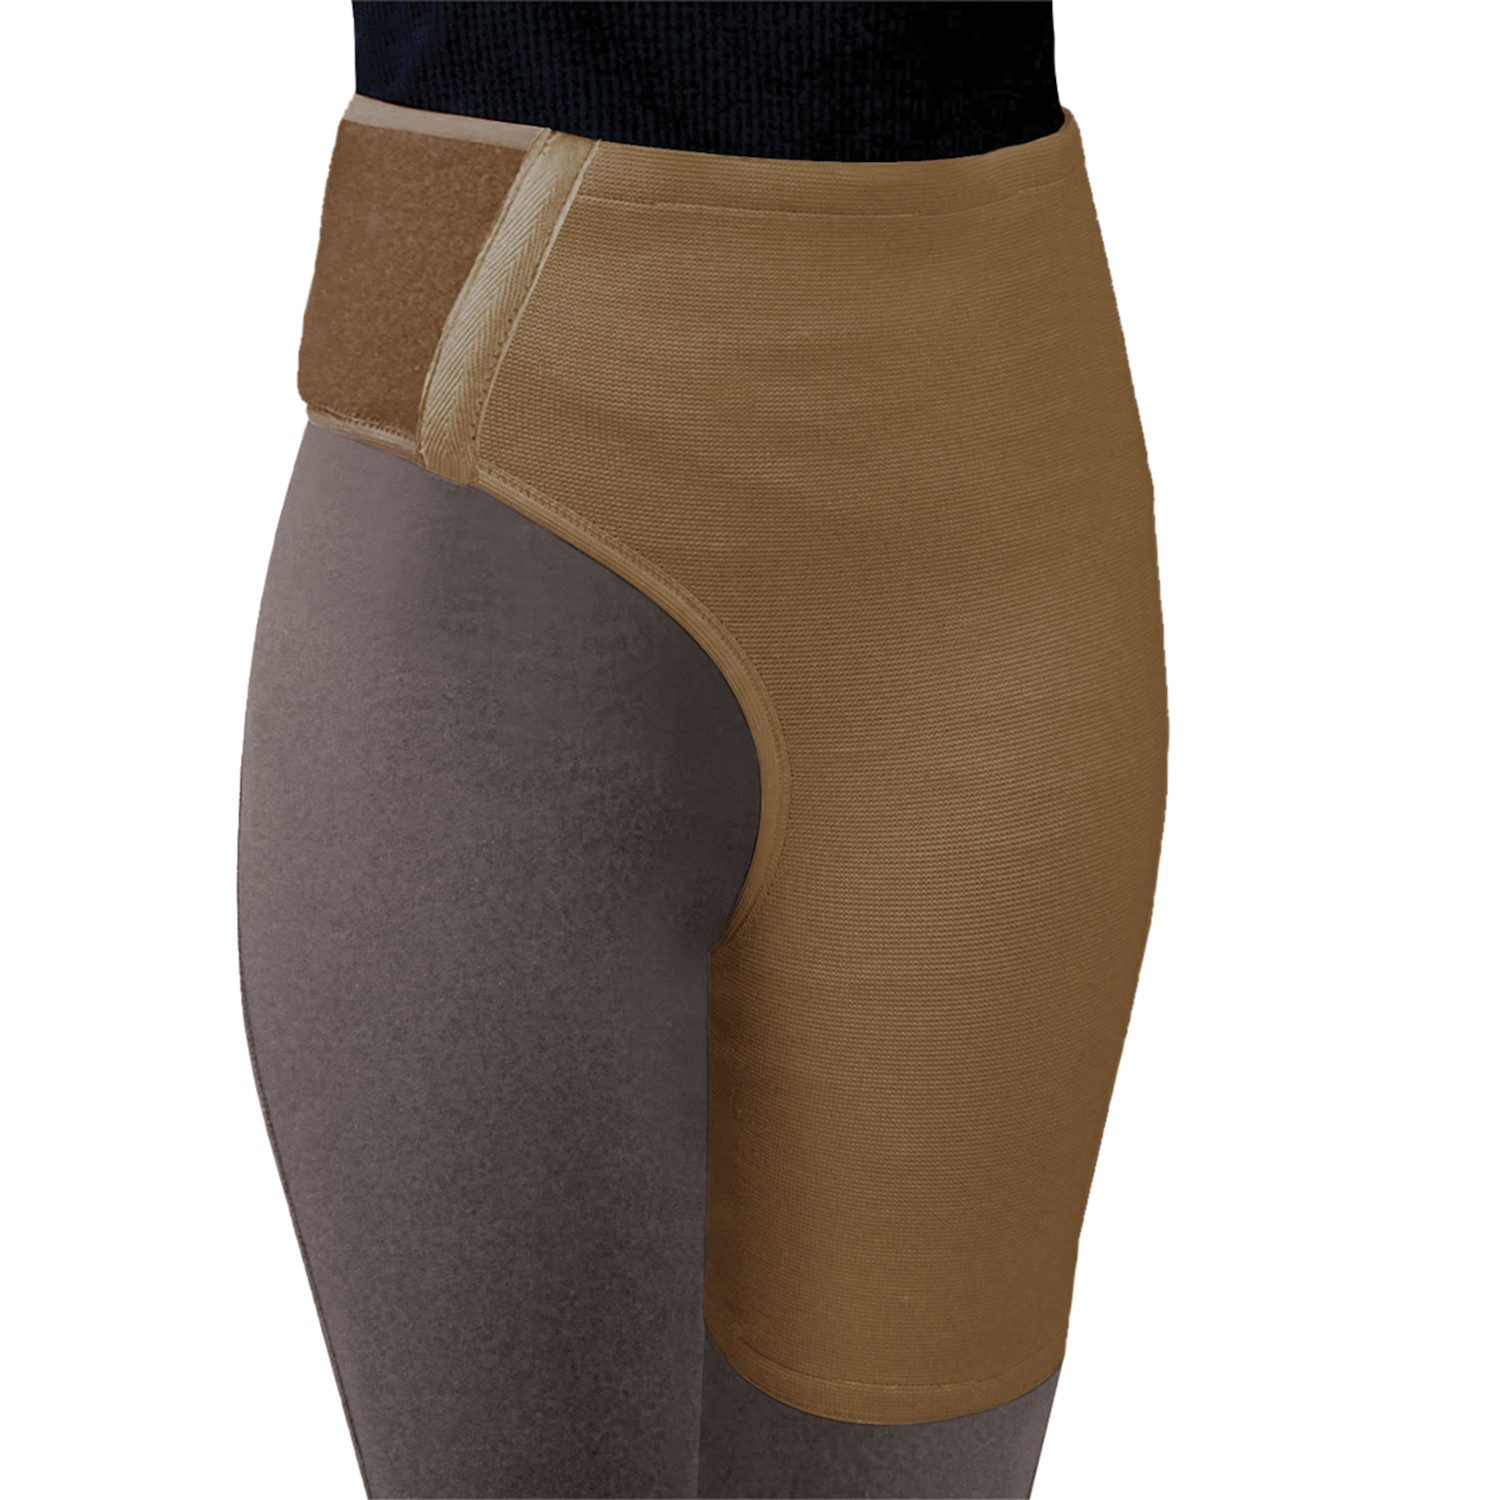 Hip Protector Support | Support Plus